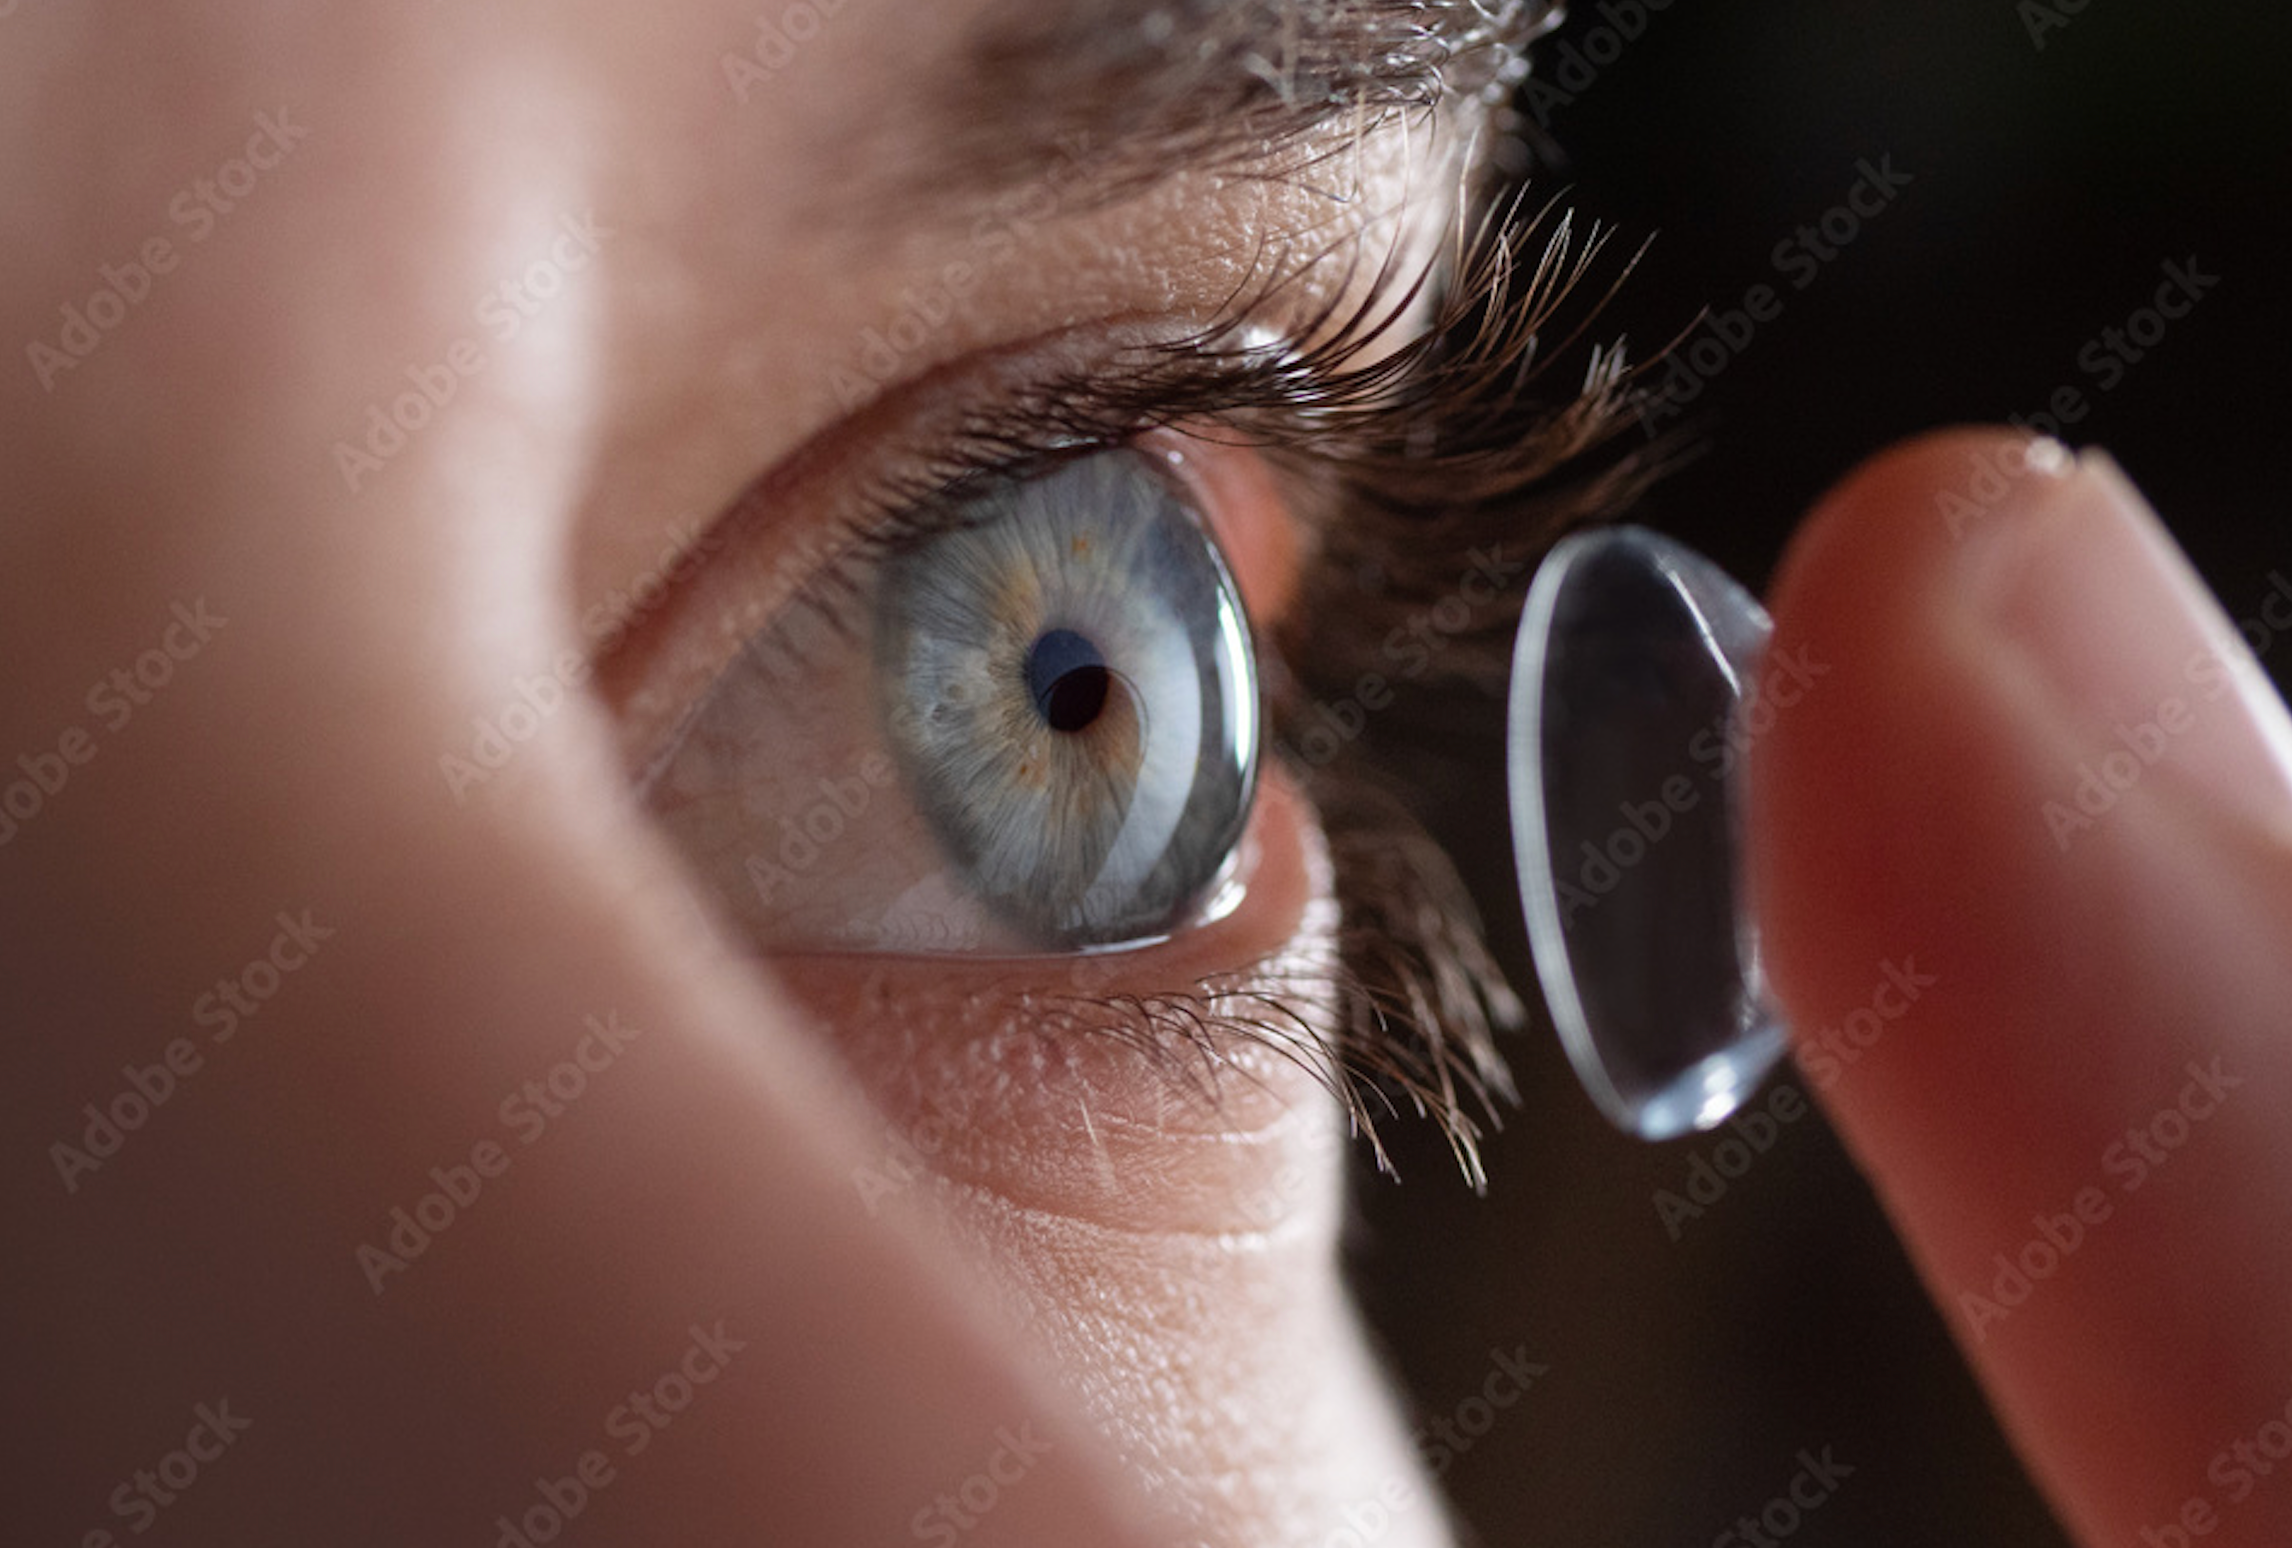 A California ophthalmologist removed 23 contact lenses from a patient's eye. (Adobe Stock illustration)